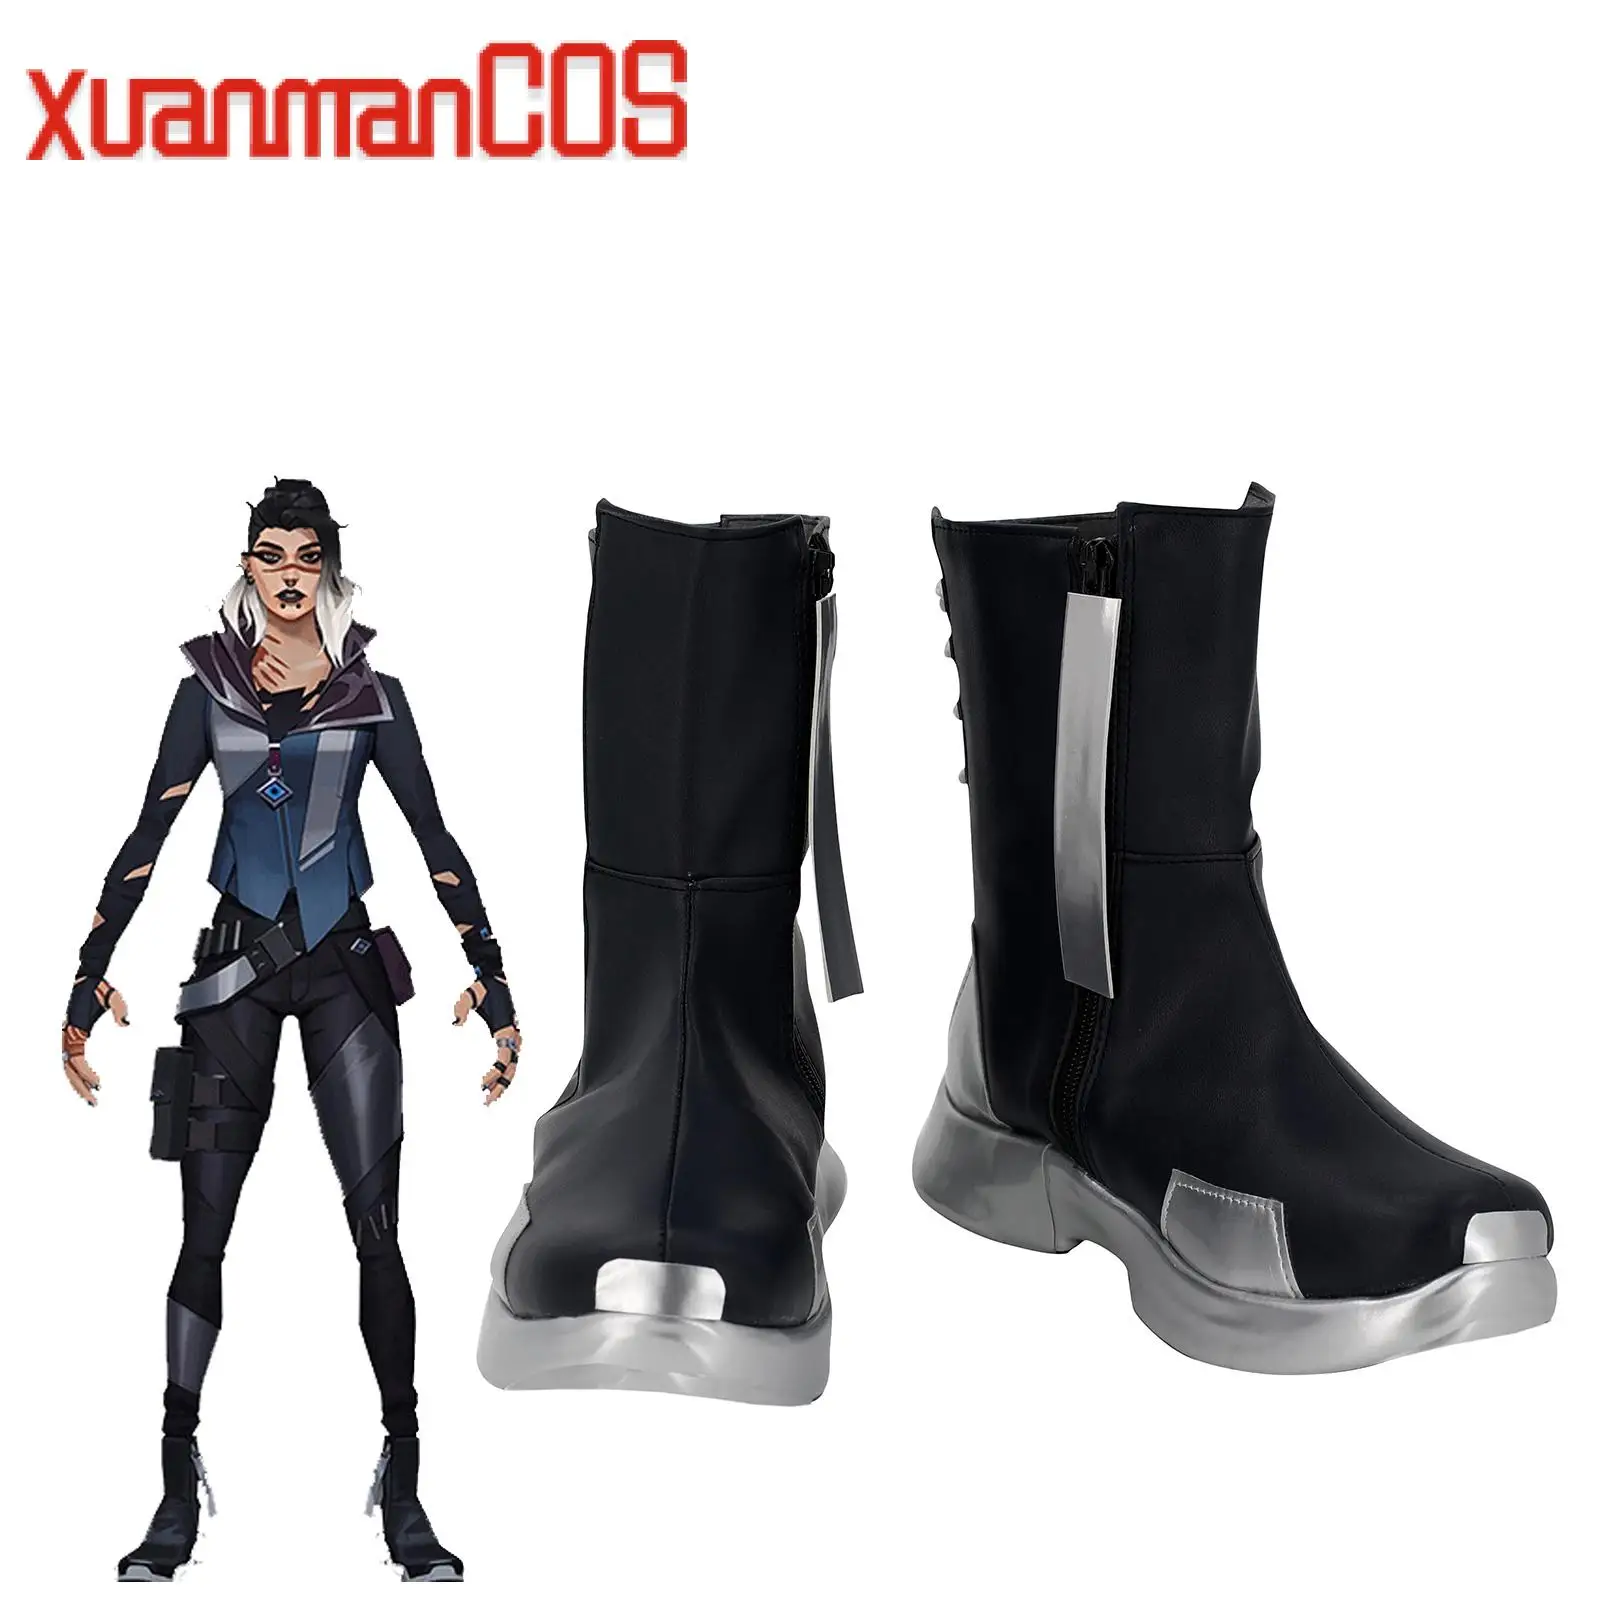 

Game Valorant Fade Cosplay Shoes Boots Halloween Costumes Accessory Custom Made Black Shoes for Women Men